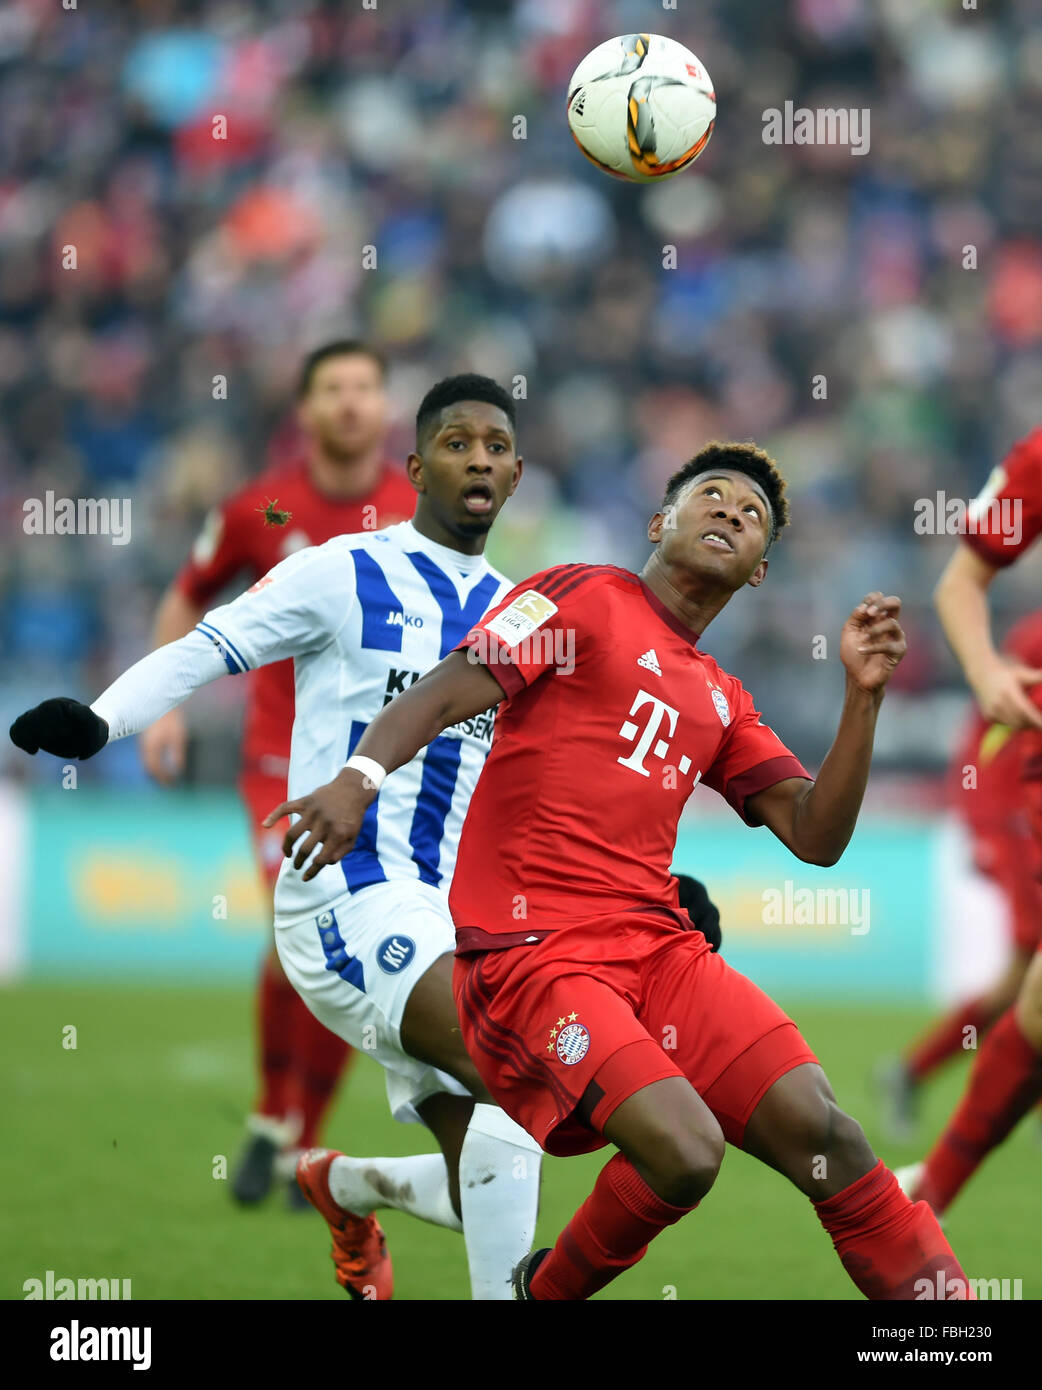 Karlsruhe, Germany. 16th Jan, 2016. Karlsruhe's Boubacar Barry (L) and Munich's David Alaba vie for the ball during the test match between Karlsruher SC and FC Bayern Munich in Wildpark Stadium in Karlsruhe, Germany, 16 January 2016. Photo: ULI DECK/dpa/Alamy Live News Stock Photo